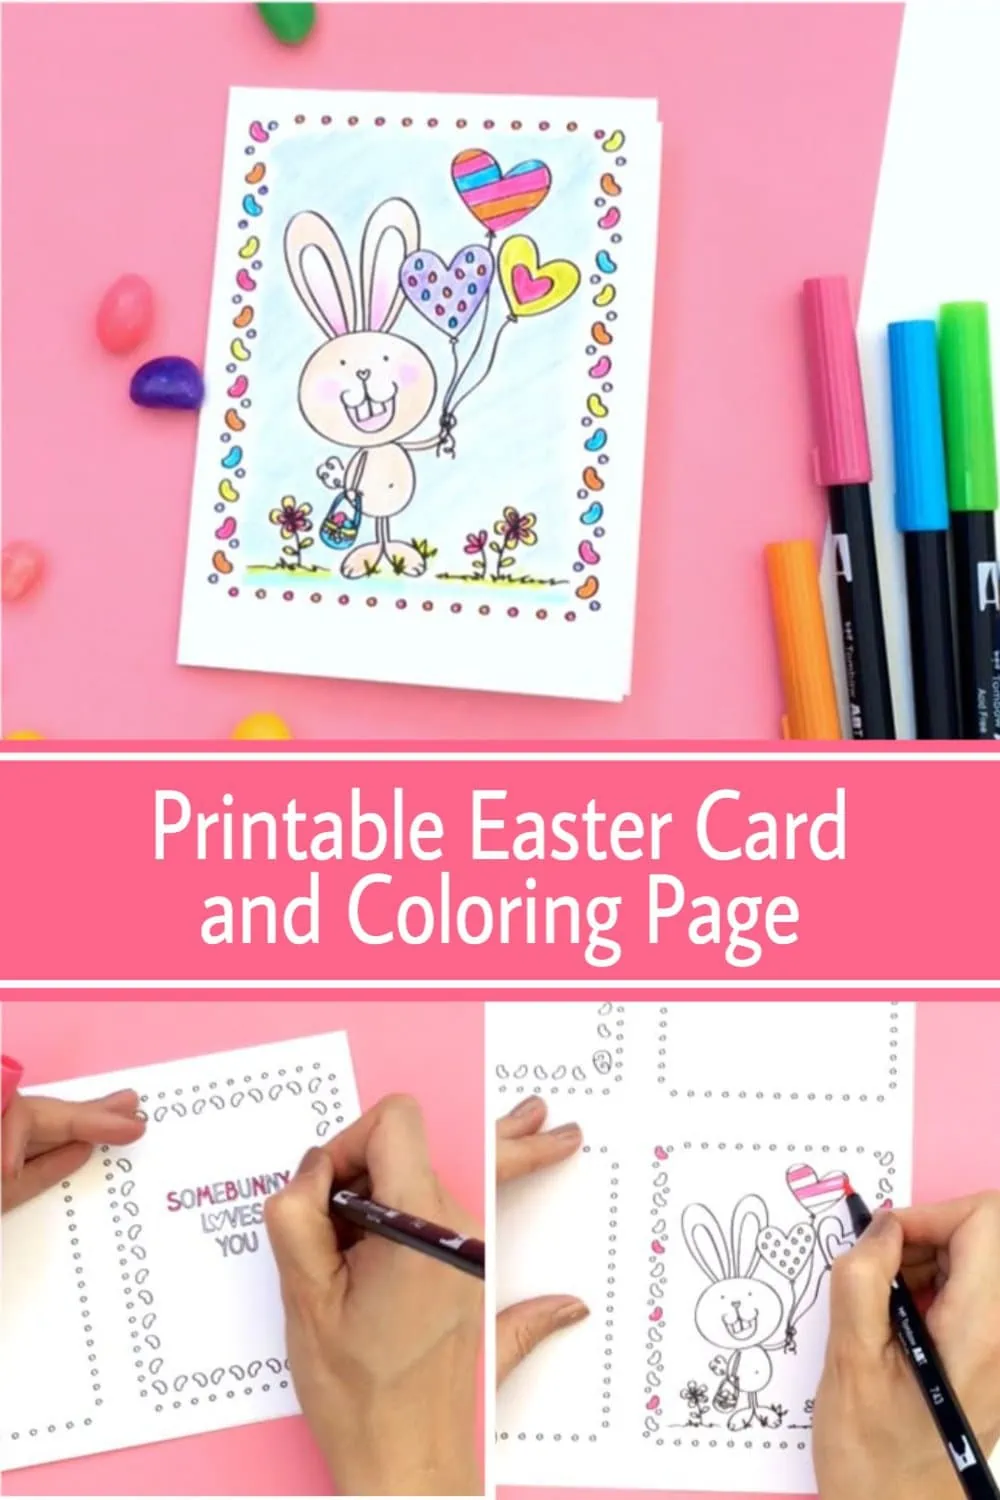 Printable Easter card and cute coloring page featuring a cute Easter bunny with balloons